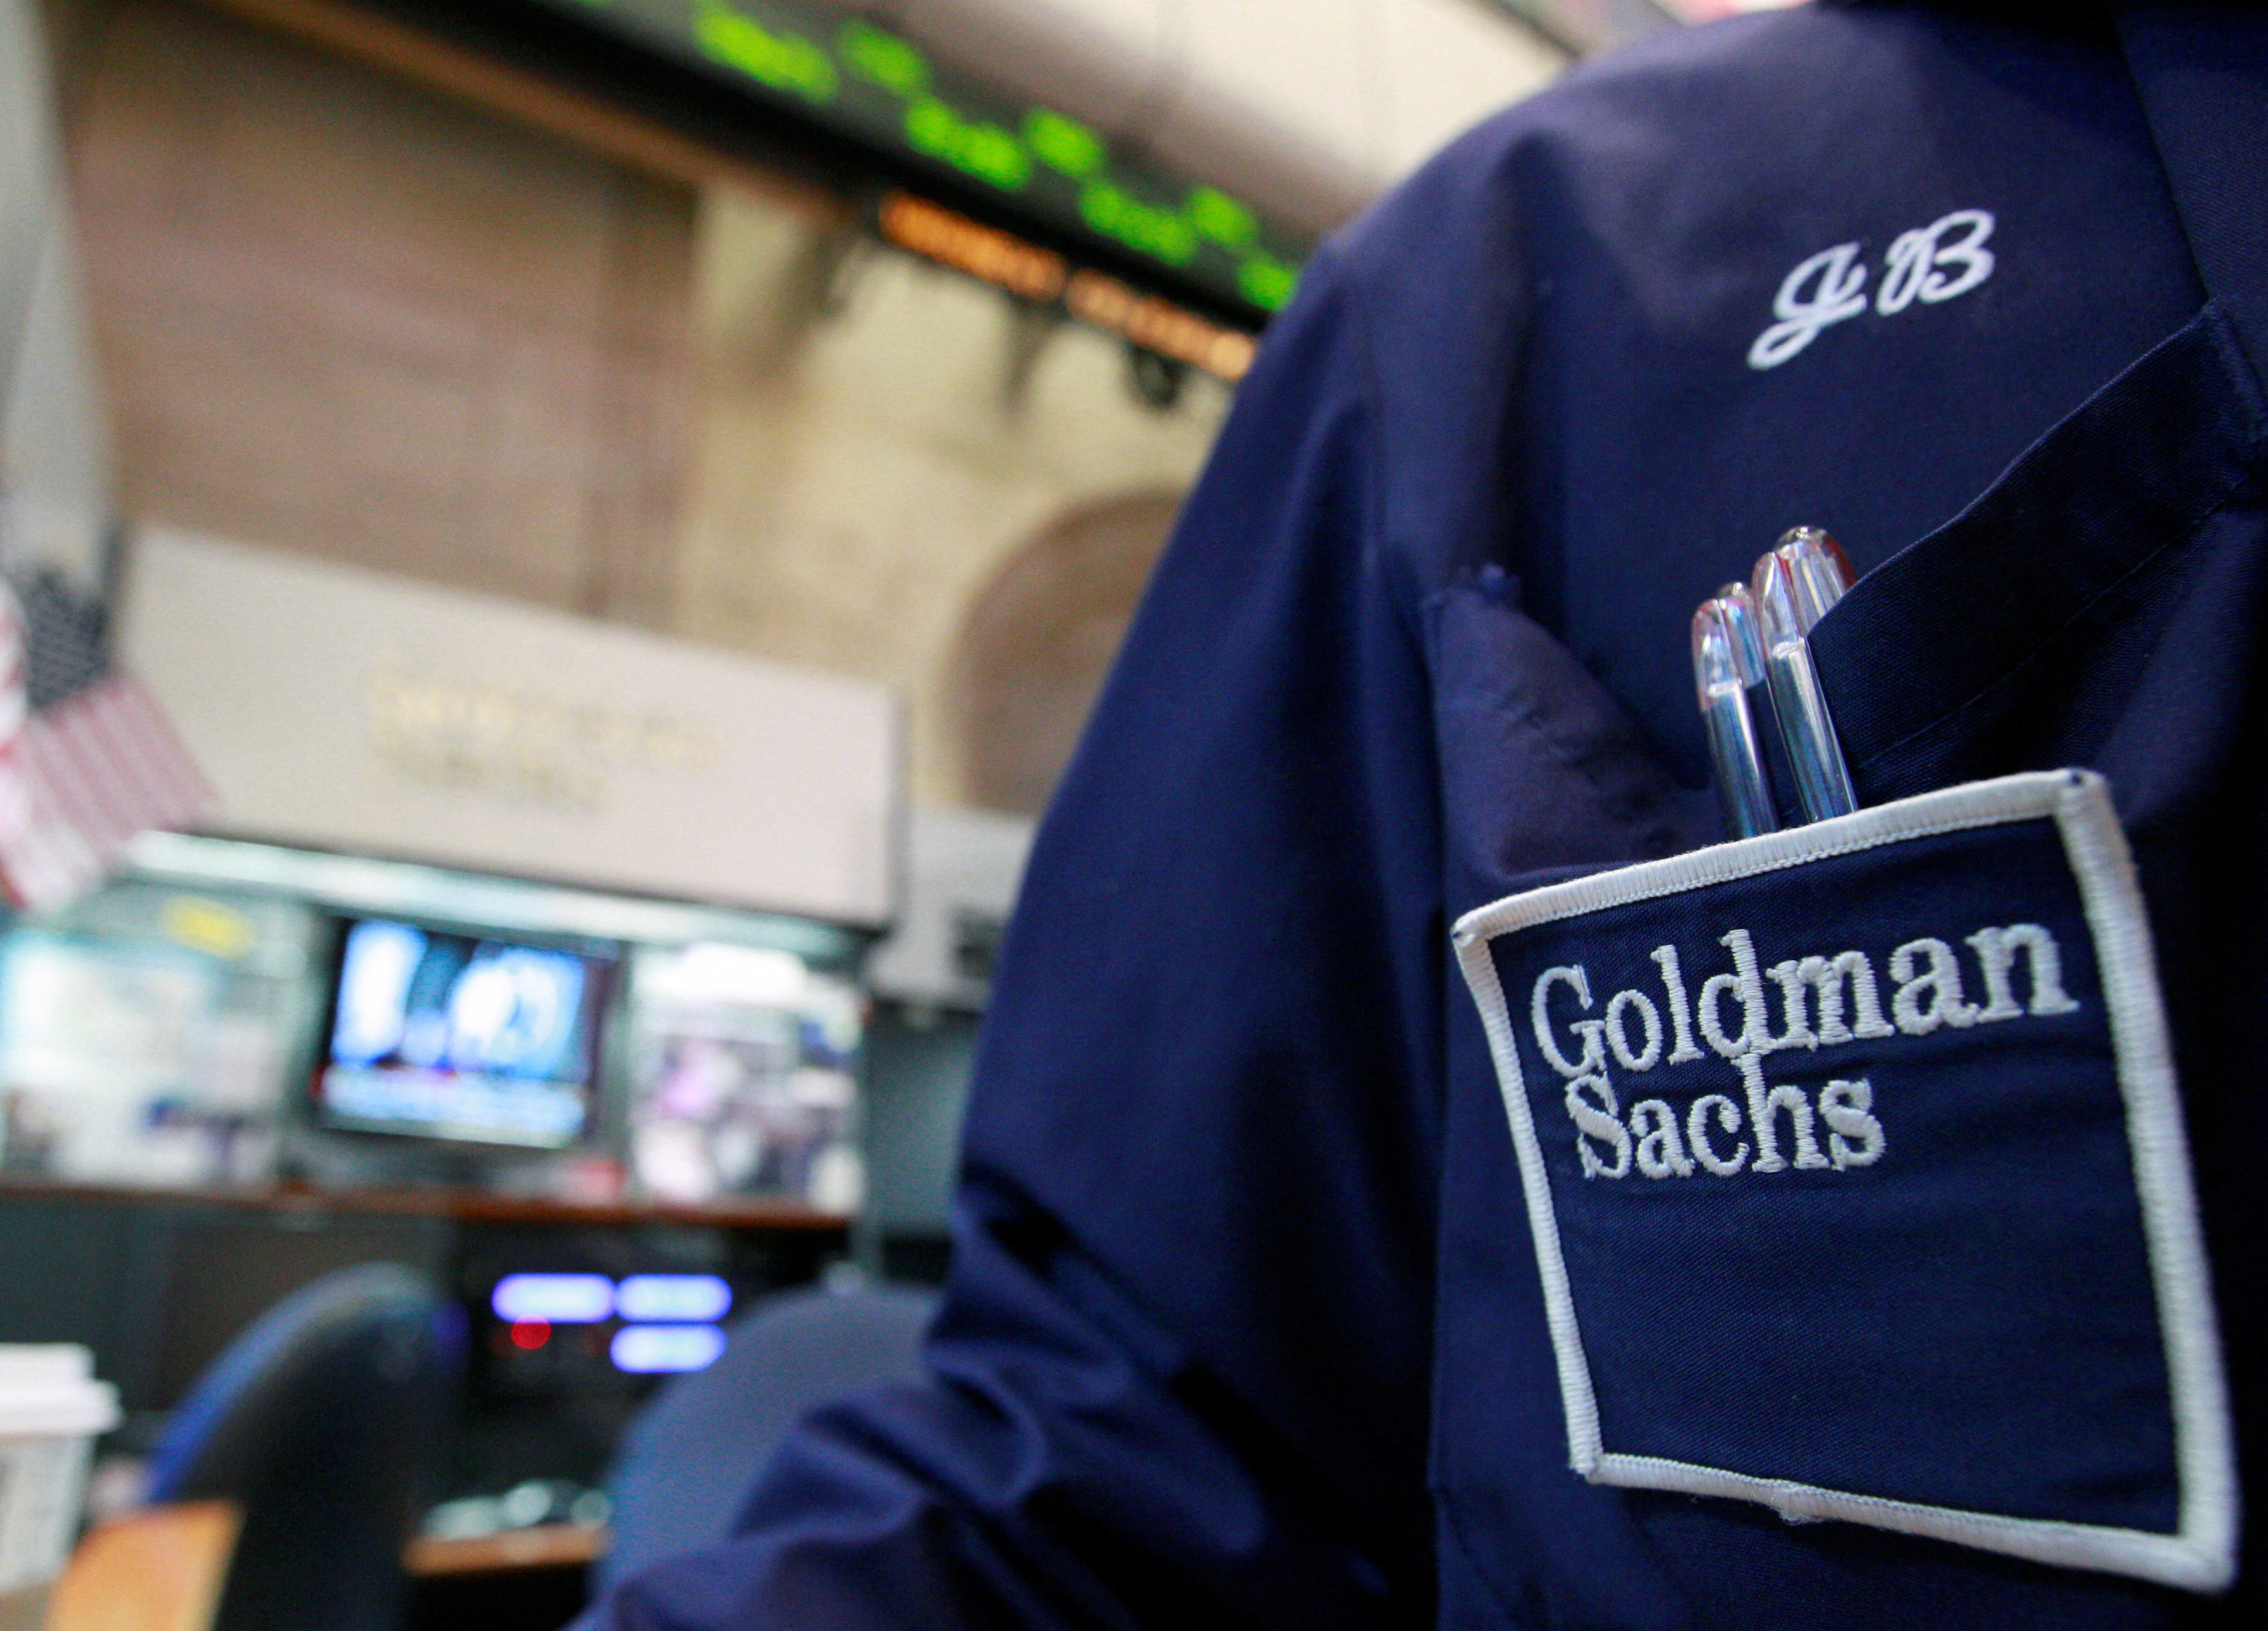 A trader works at the Goldman Sachs booth on the floor of the New York Stock Exchange